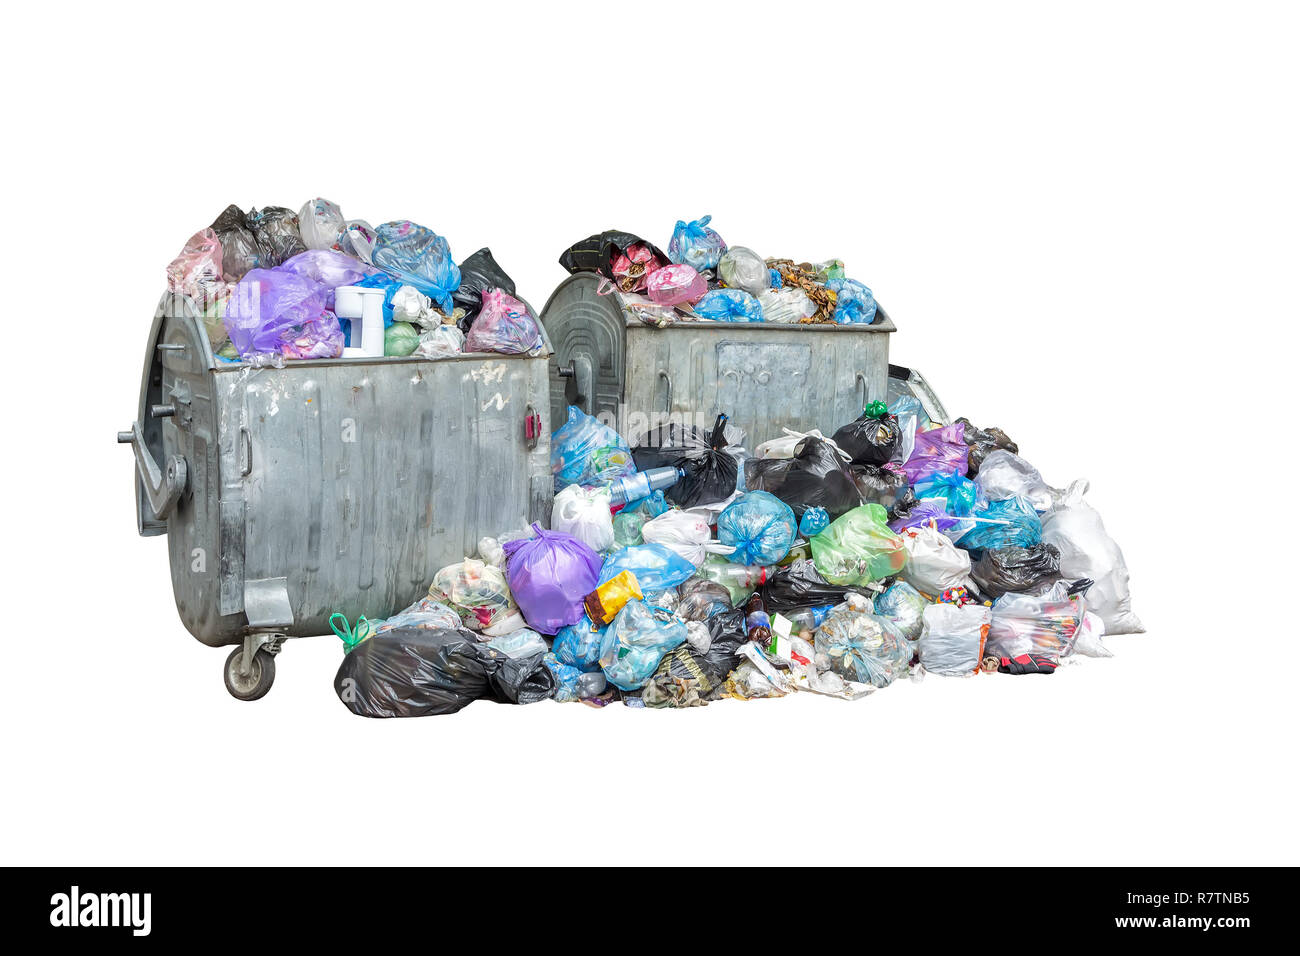 https://c8.alamy.com/comp/R7TNB5/dumpsters-being-full-with-garbage-and-big-pile-of-garbage-in-black-blue-trash-bags-isolated-on-white-background-ecology-concept-pollution-environmen-R7TNB5.jpg